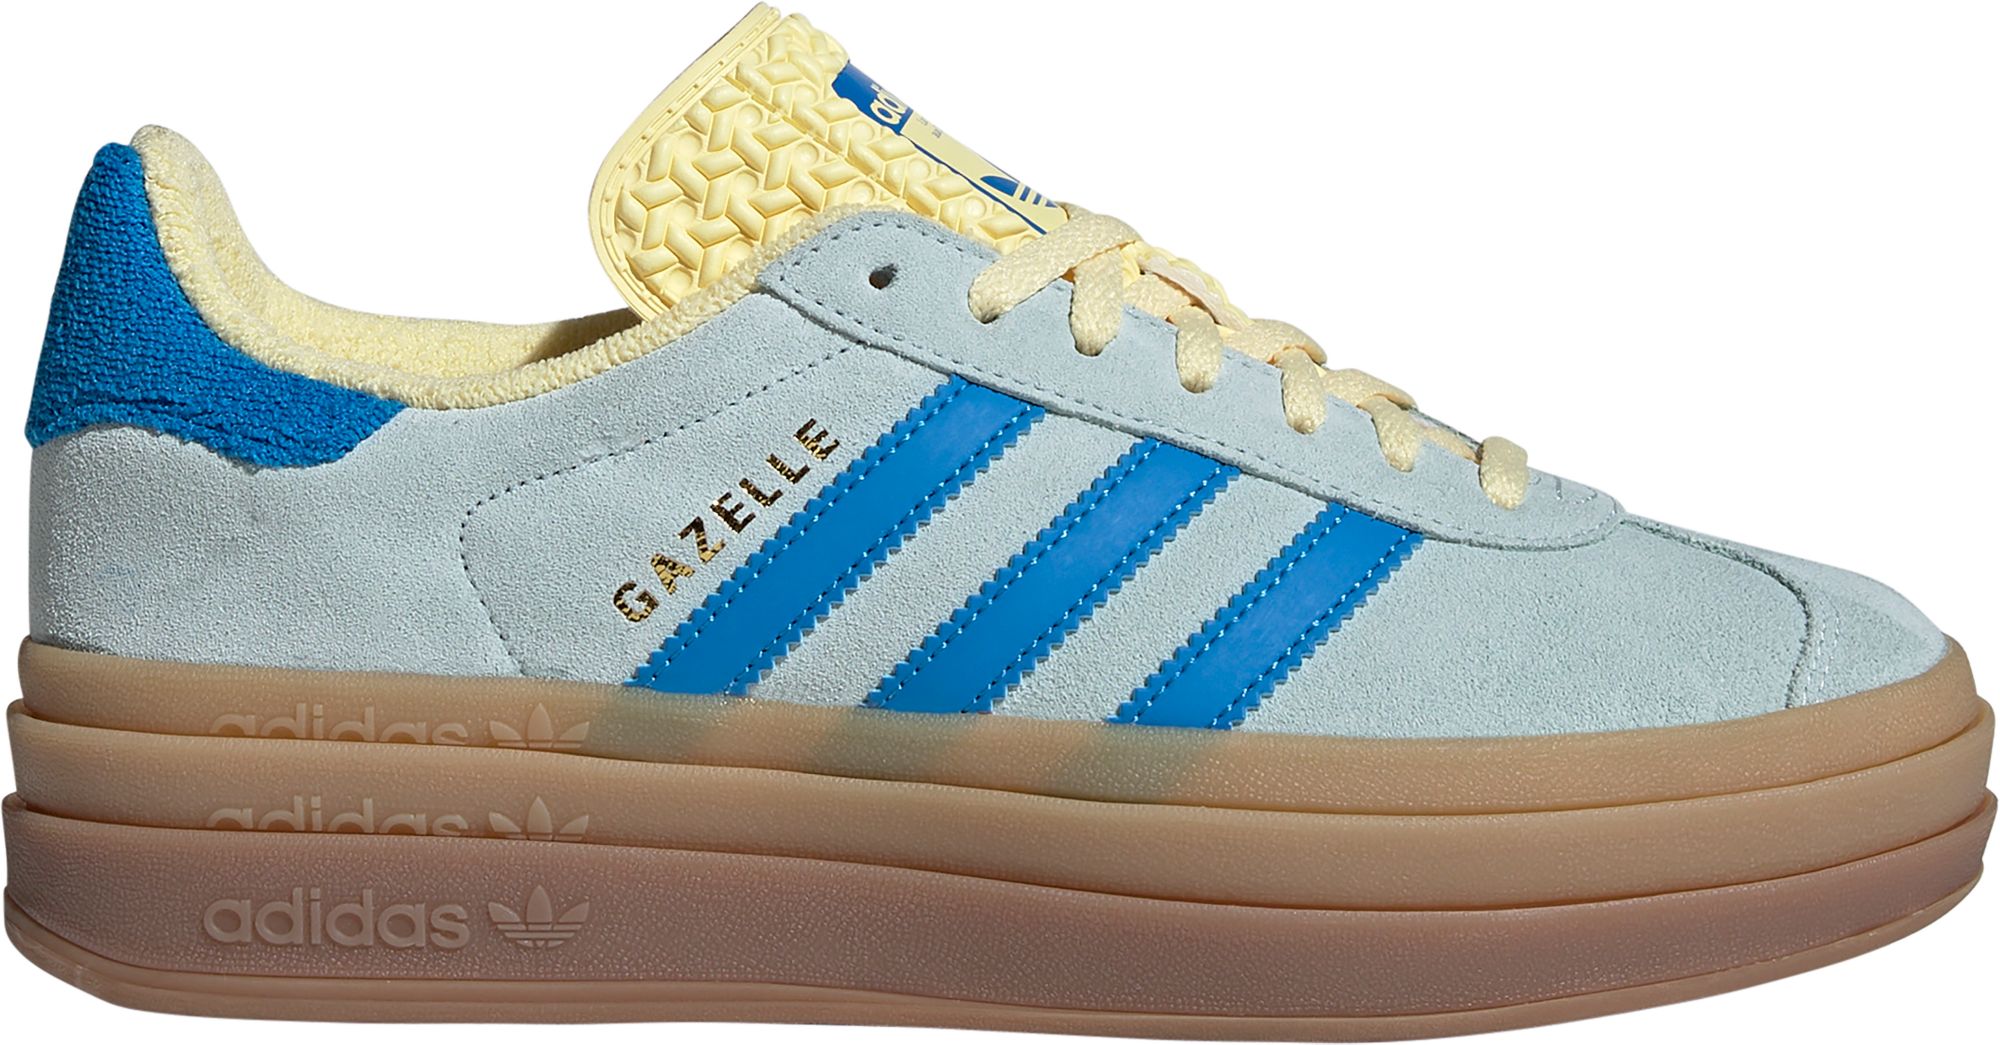 cheapest place to buy adidas gazelle